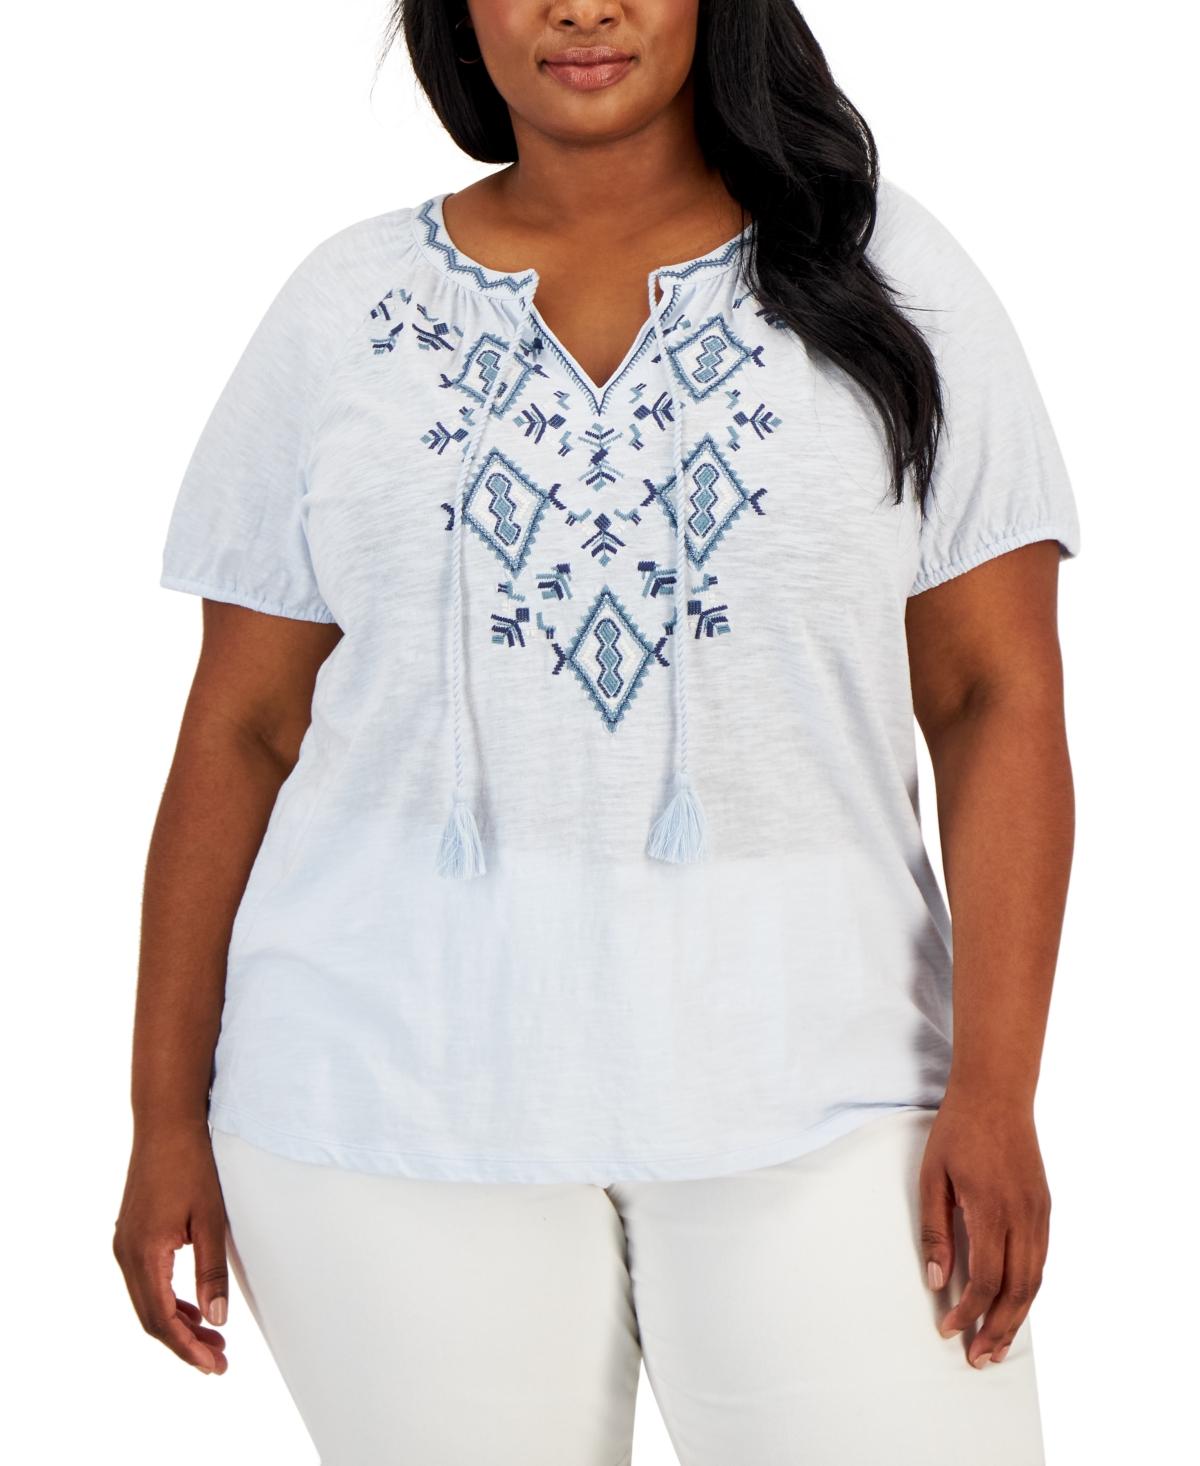 Woman Within Women's Plus Size Embroidered Henley Tee - 3X, Deep